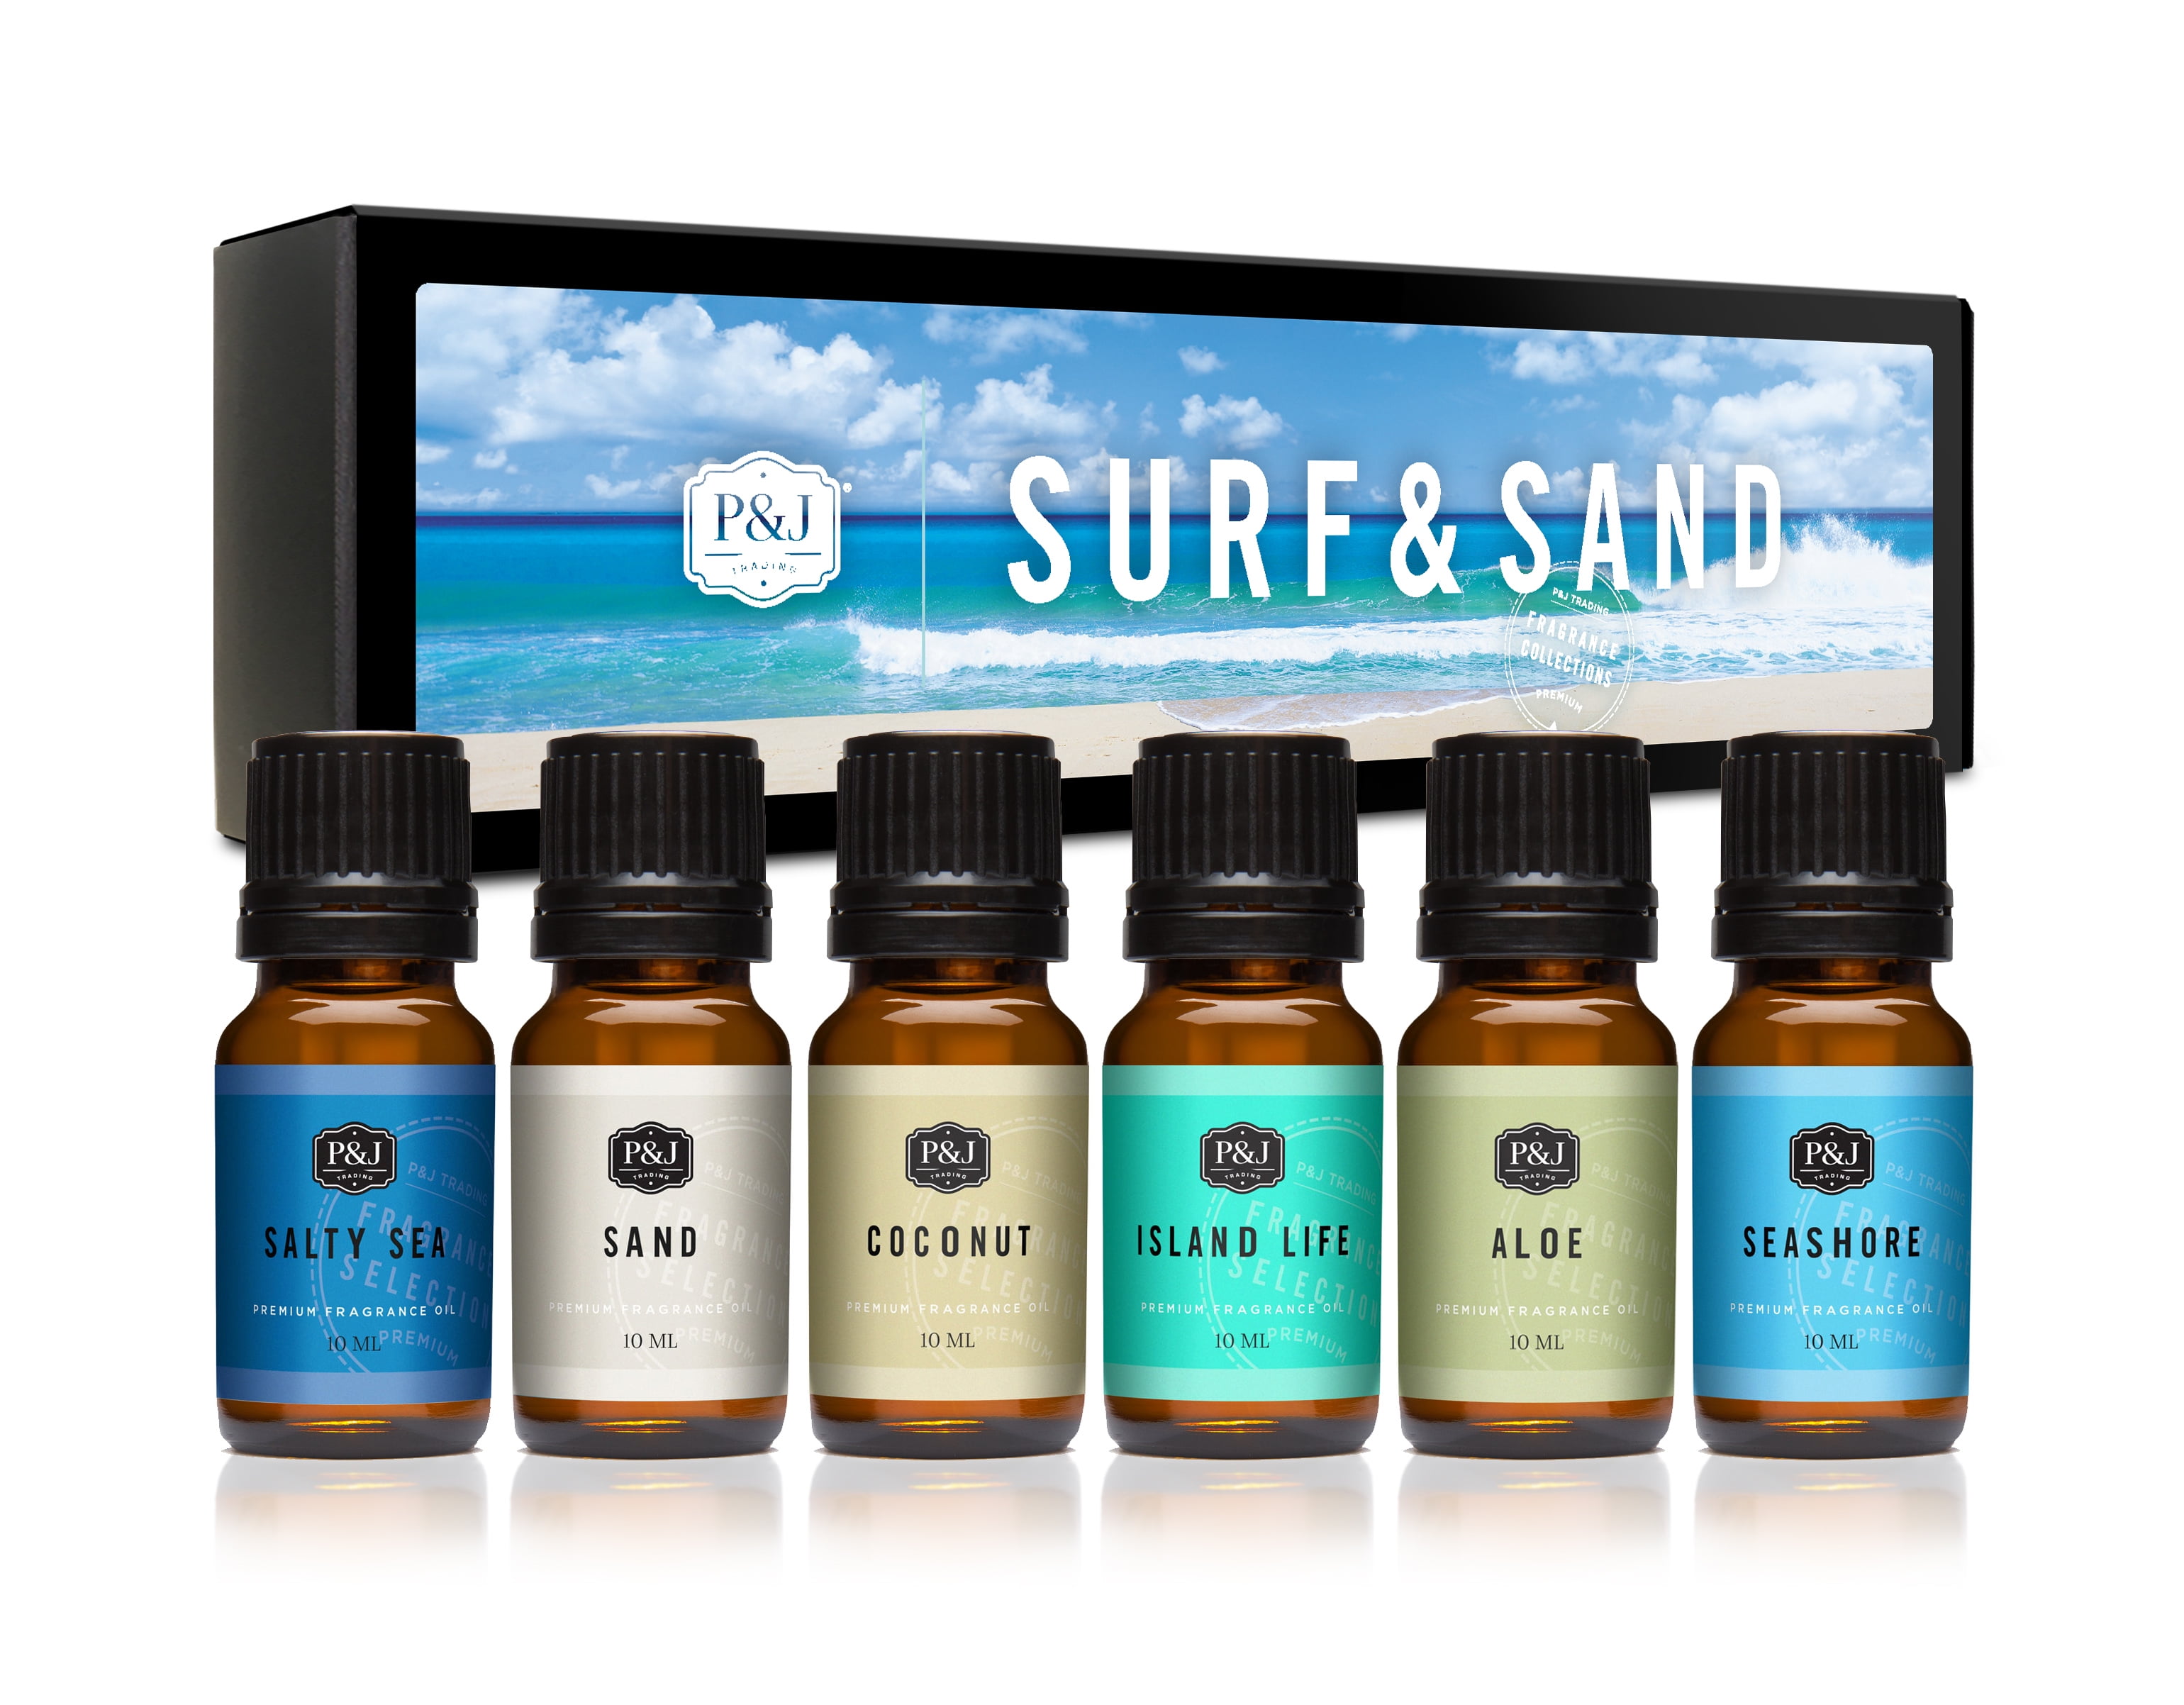 P&J Trading Fragrance Oil | Surf & Sand Set of 6 - Scented Oil for Soap  Making, Diffusers, Candle Making, Lotions, Haircare, Slime, and Home  Fragrance